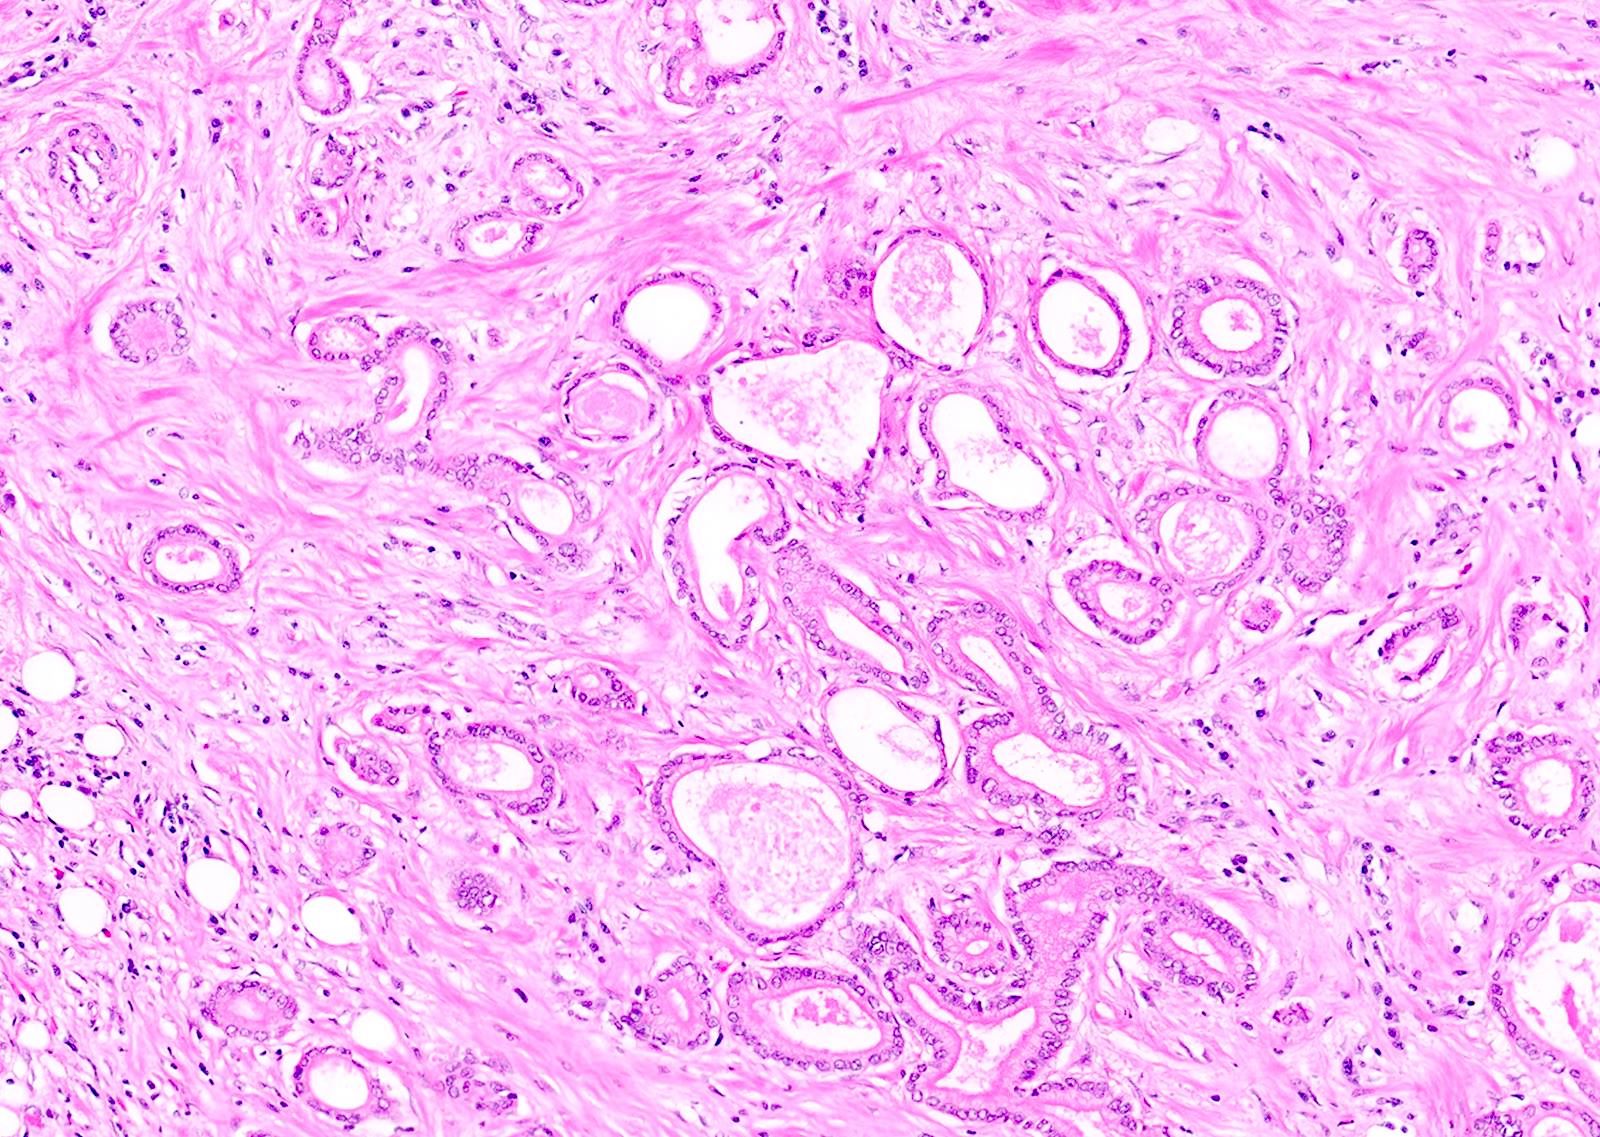 Ductal adenocarcinoma component